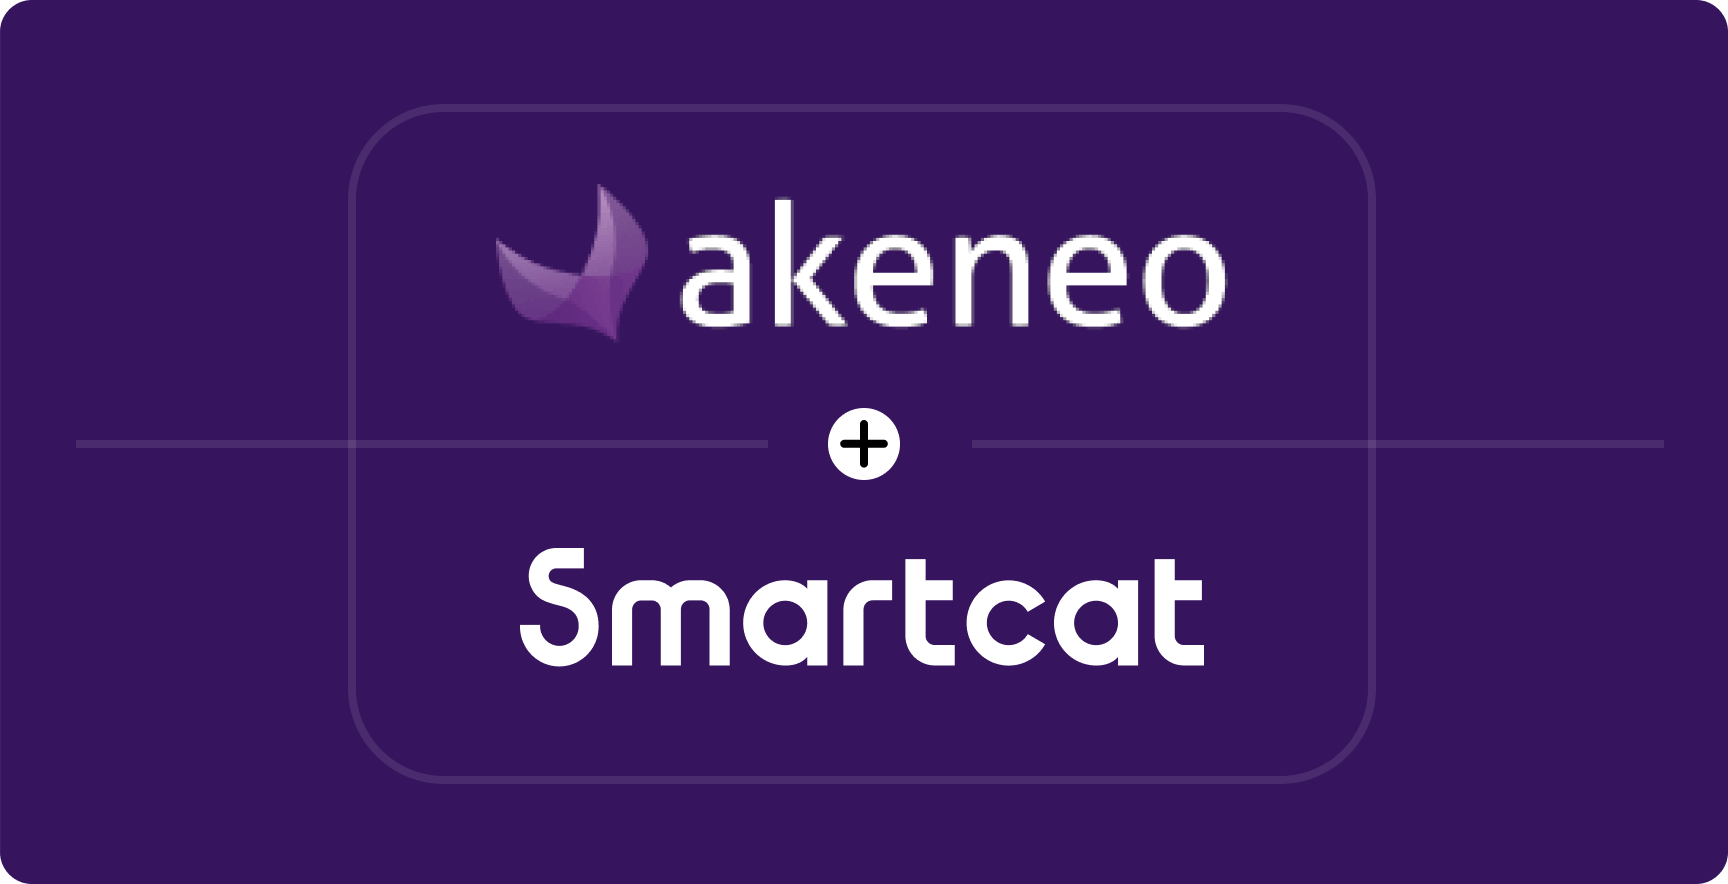 Use Smartcat to automate localization of your Akeneo account